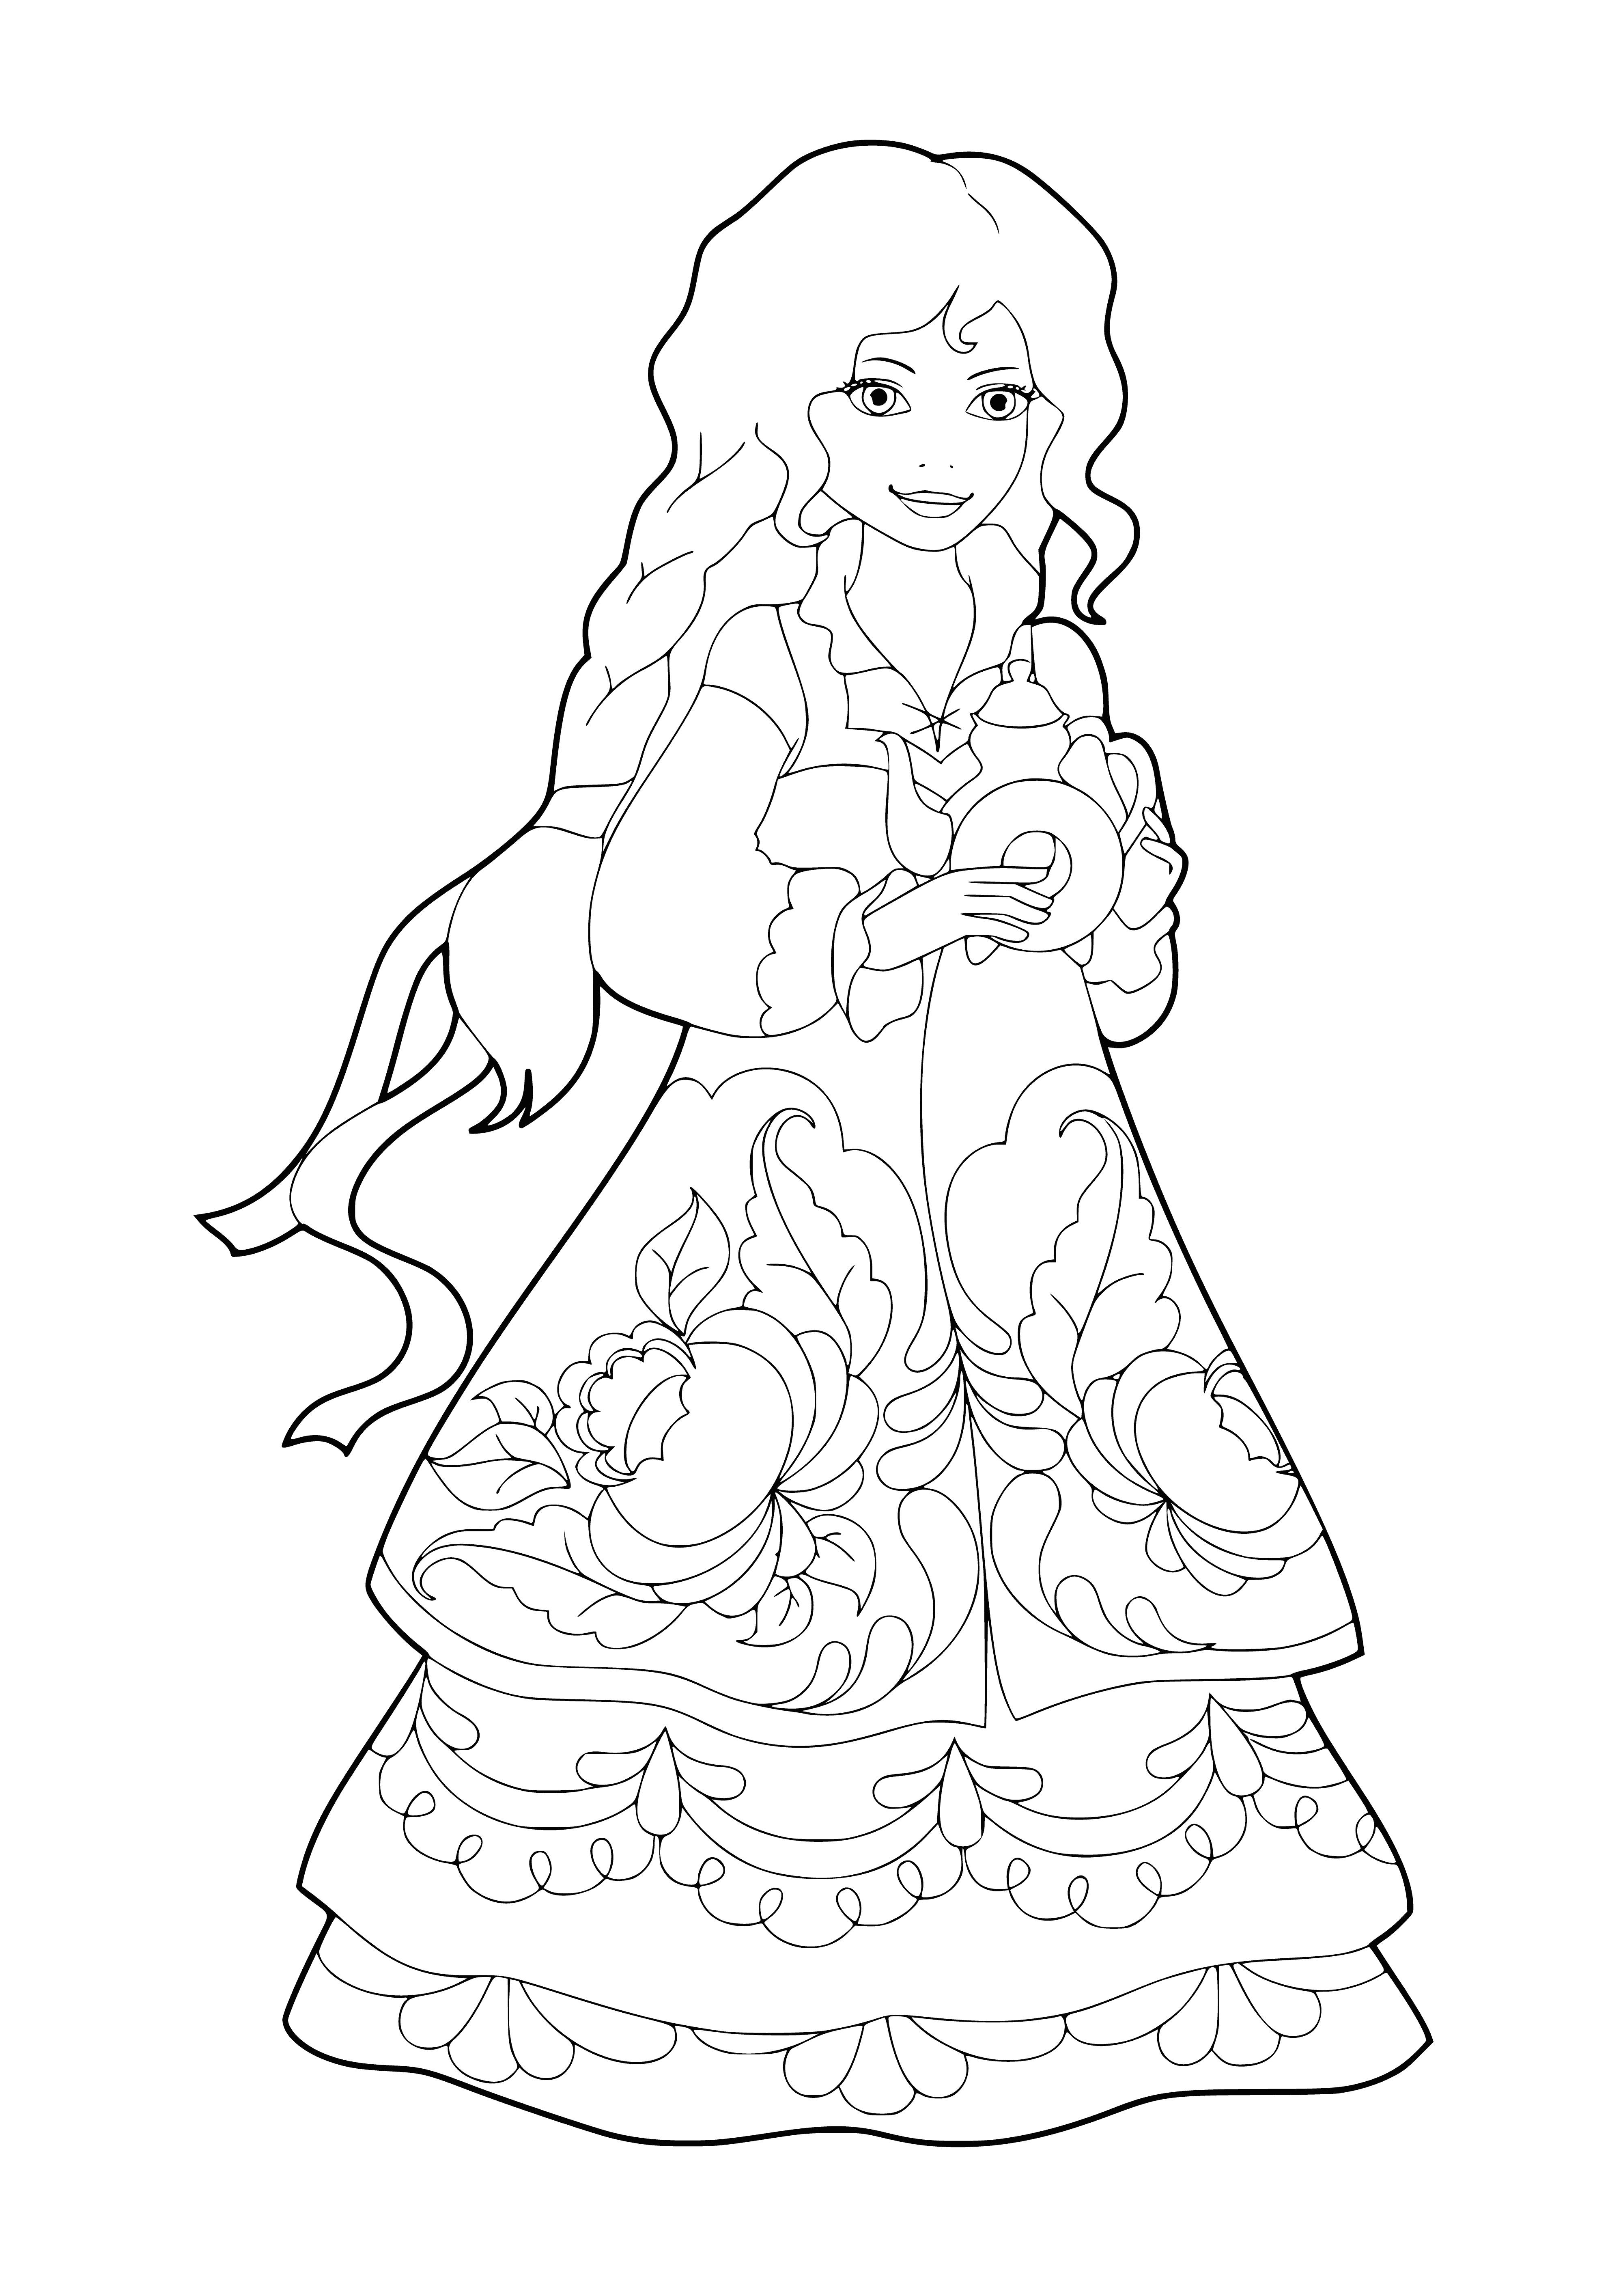 coloring page: 3 beautiful Russian women wearing white dresses, each with a different colored scarf, arms around each other - one looking at camera, two looking away.